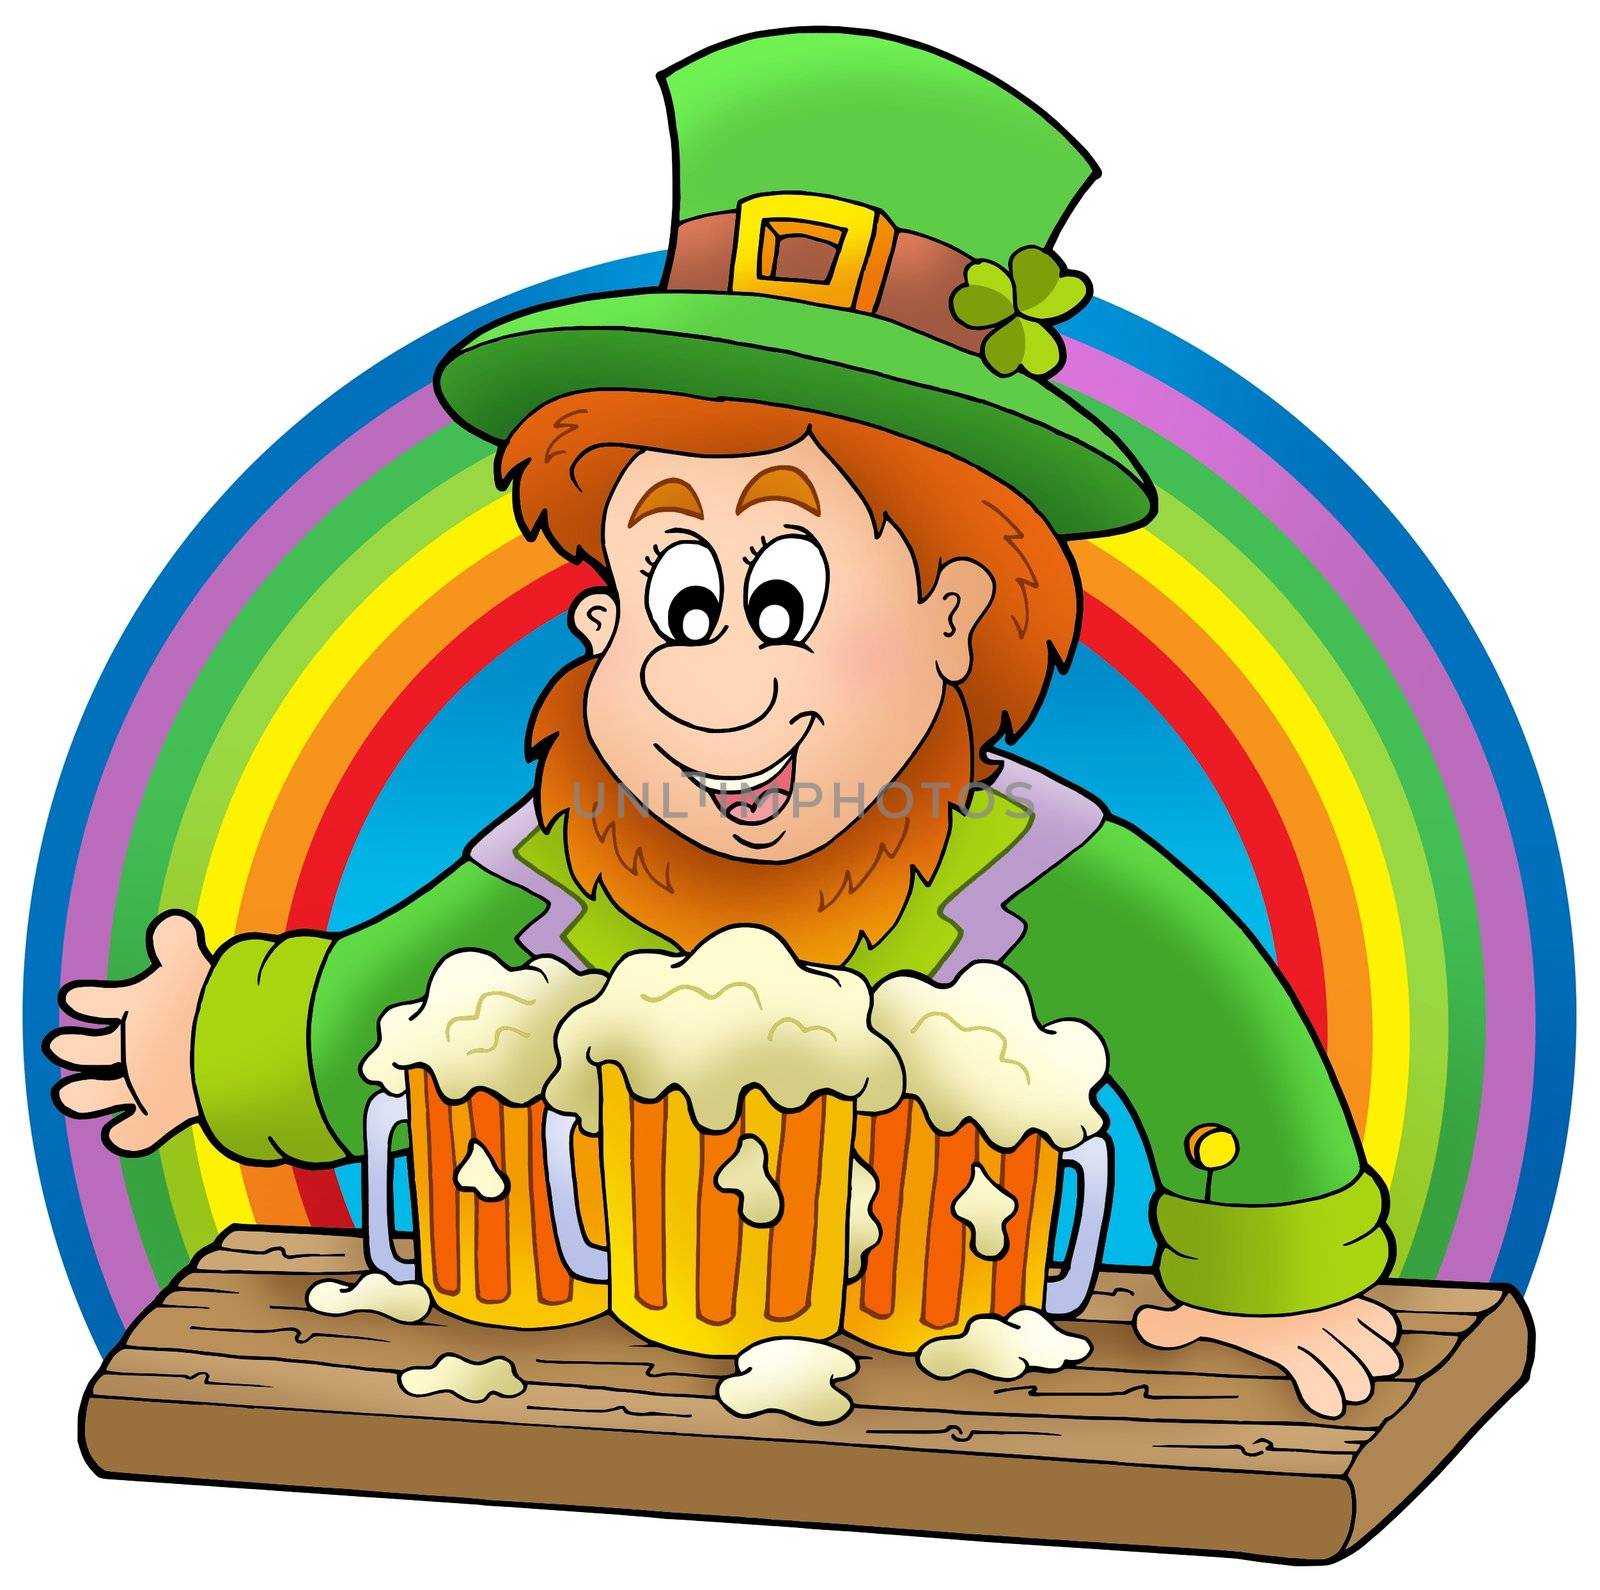 Leprechaun with beers and rainbow - color illustration.